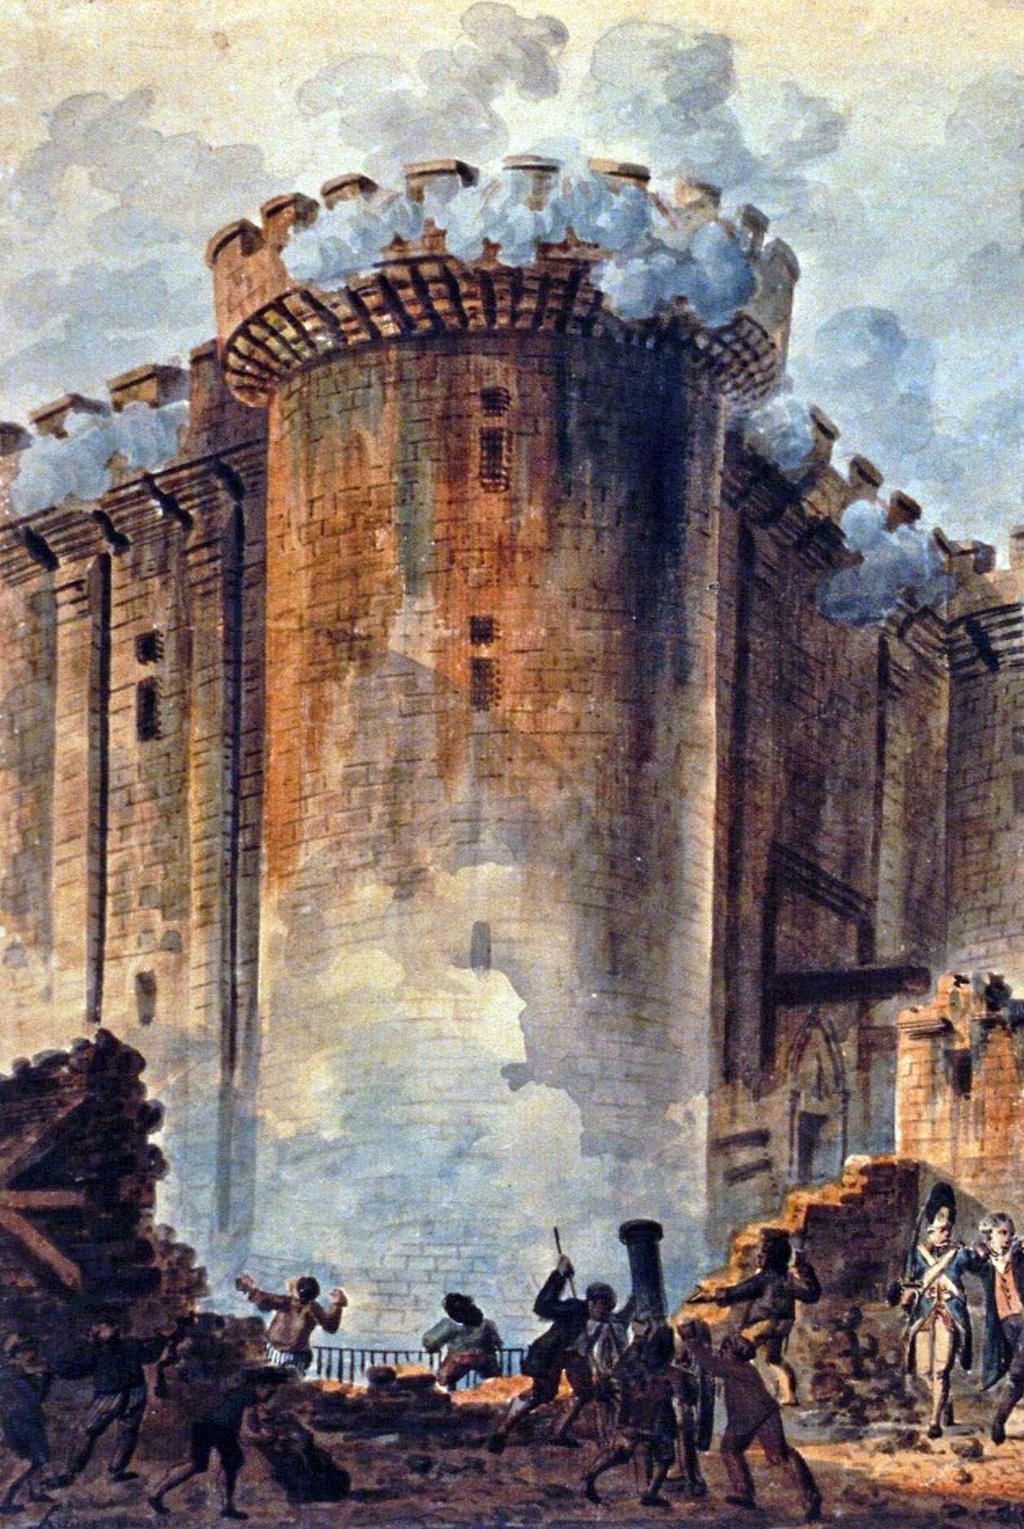 Storming the Bastille Bastille was a prison for political and upper-class offenders Prisoners were jailed without trial, on order of the king Start of the Revolution: rioters stormed the Bastille